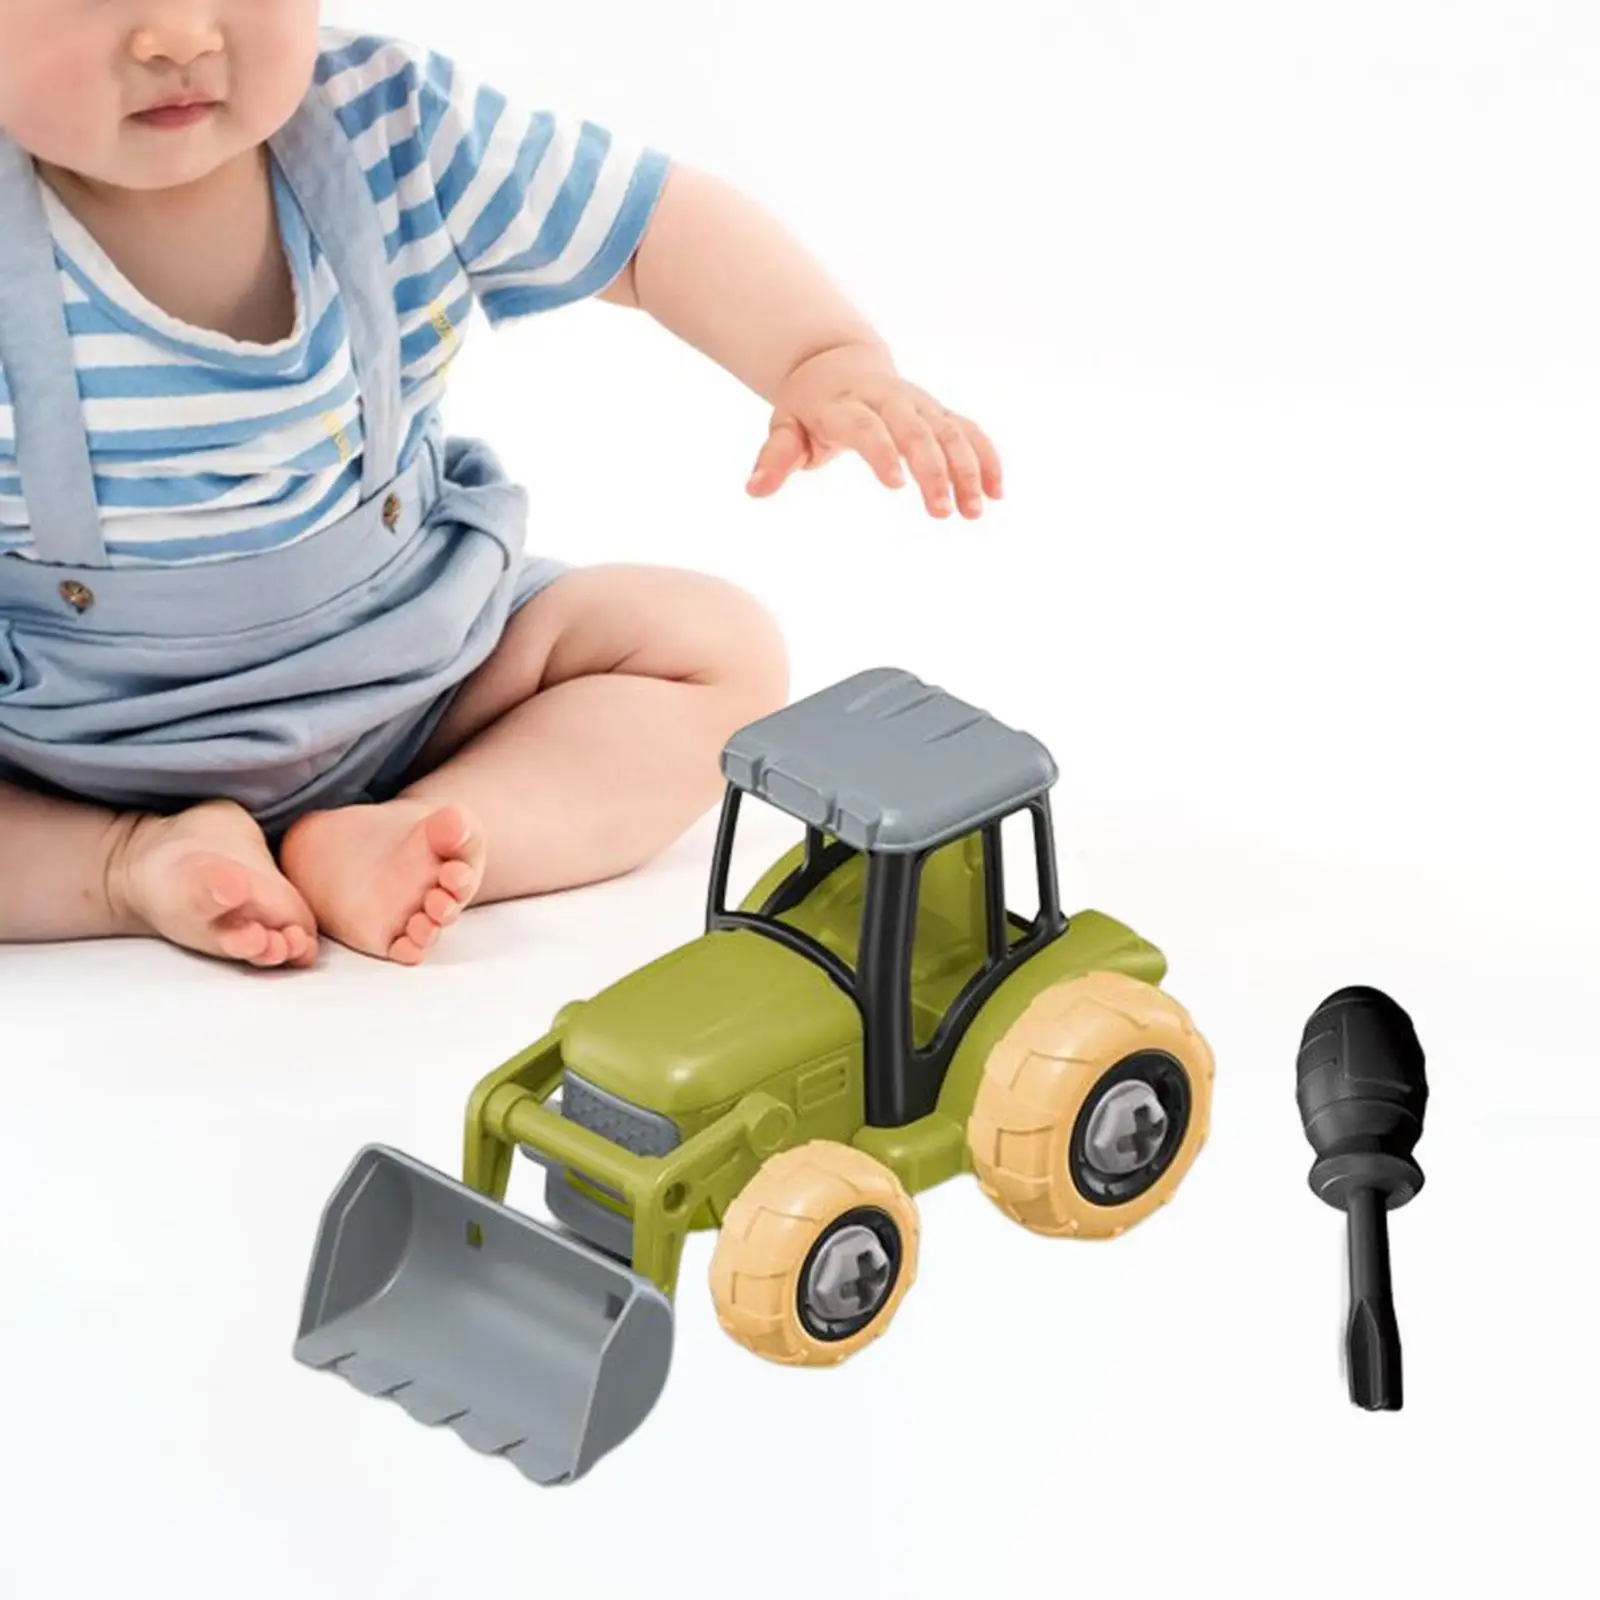 Take Apart Toy Excavator Truck with Toy Tool Building Play Set for Girls Boys 3 4 5 6 7 Year Old Preschool Kids Birthday Gifts